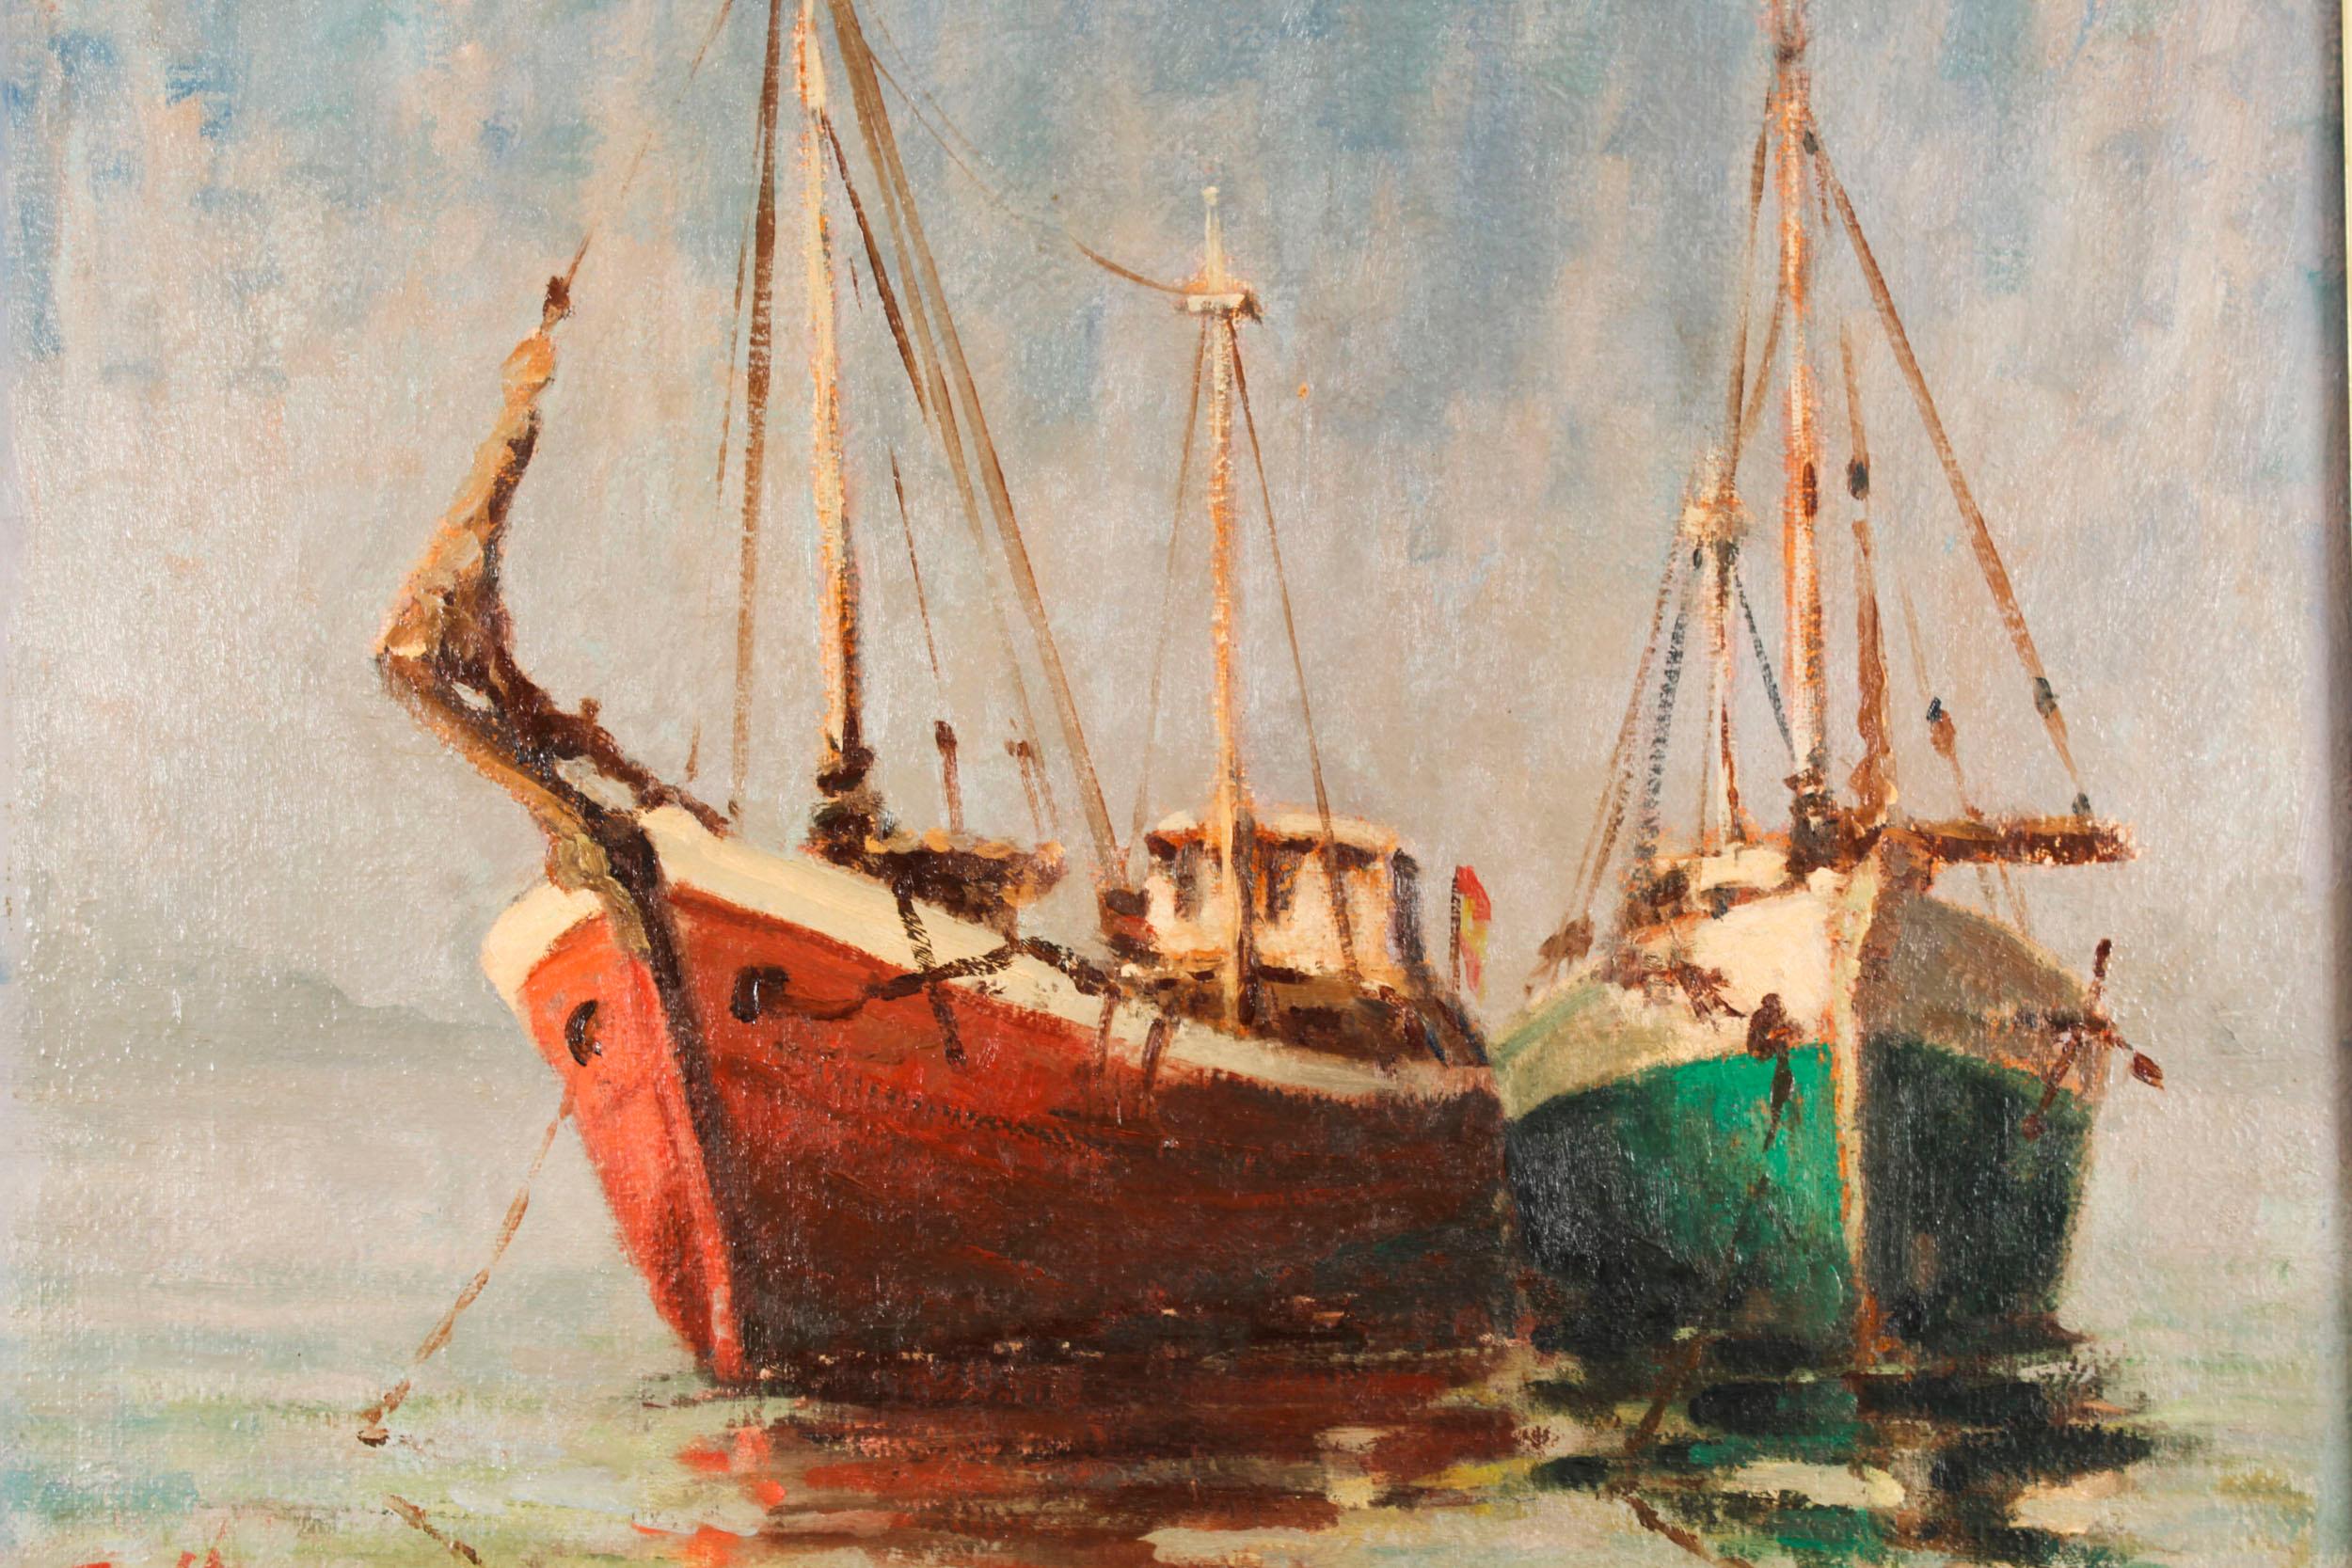 Mid-20th Century Vintage Oil Painting of Fishing Boats by Harold Edward Collin (1936-1973) For Sale